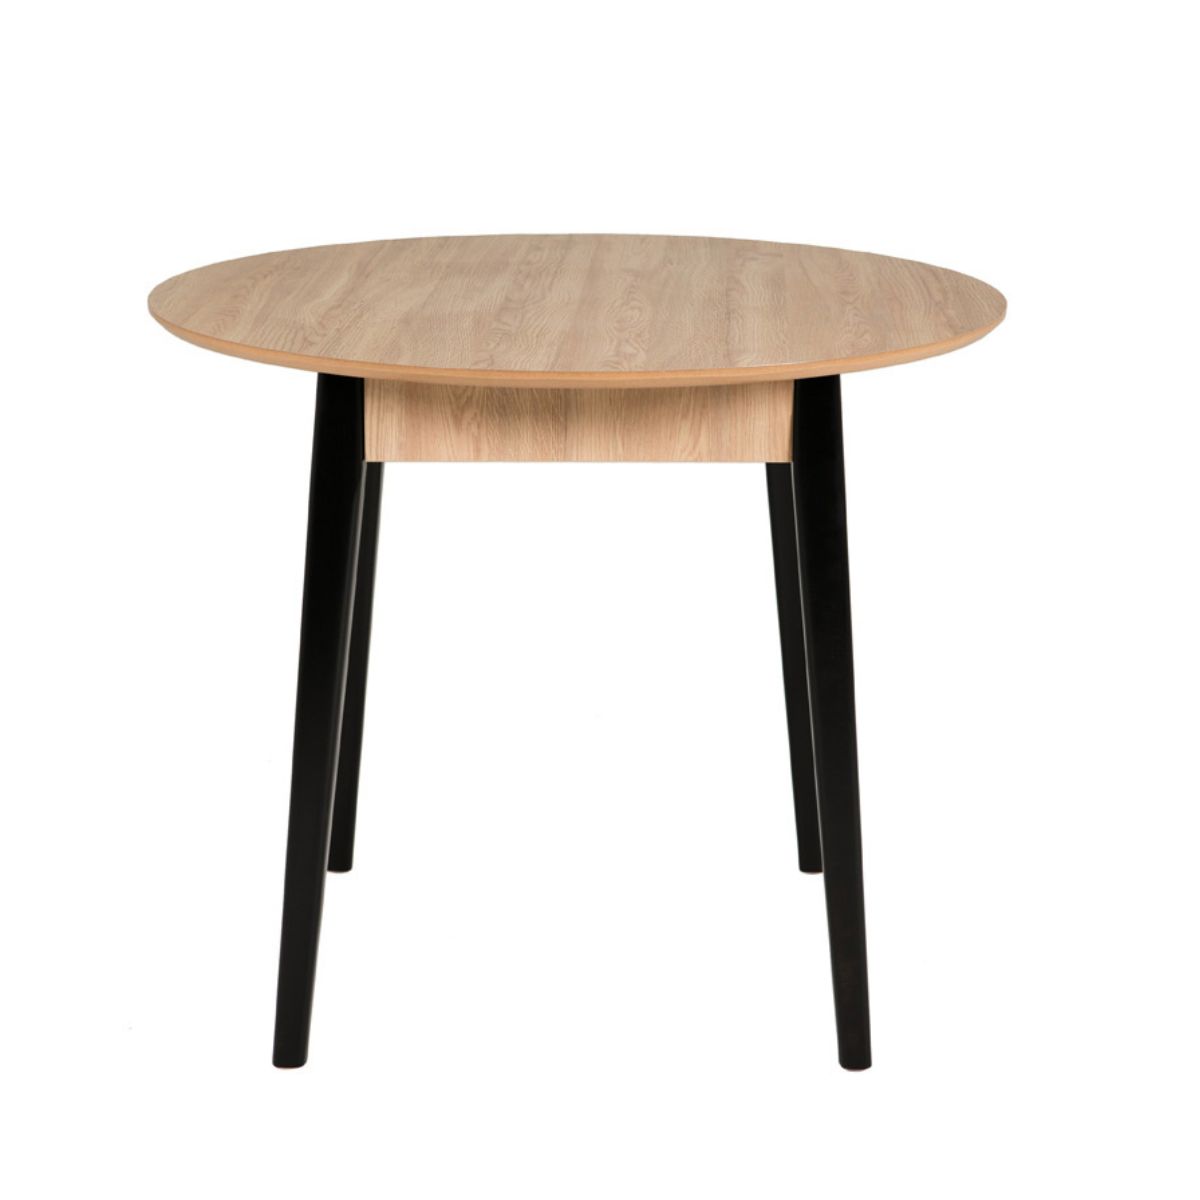 Libby Round Oak Dining Table - 2